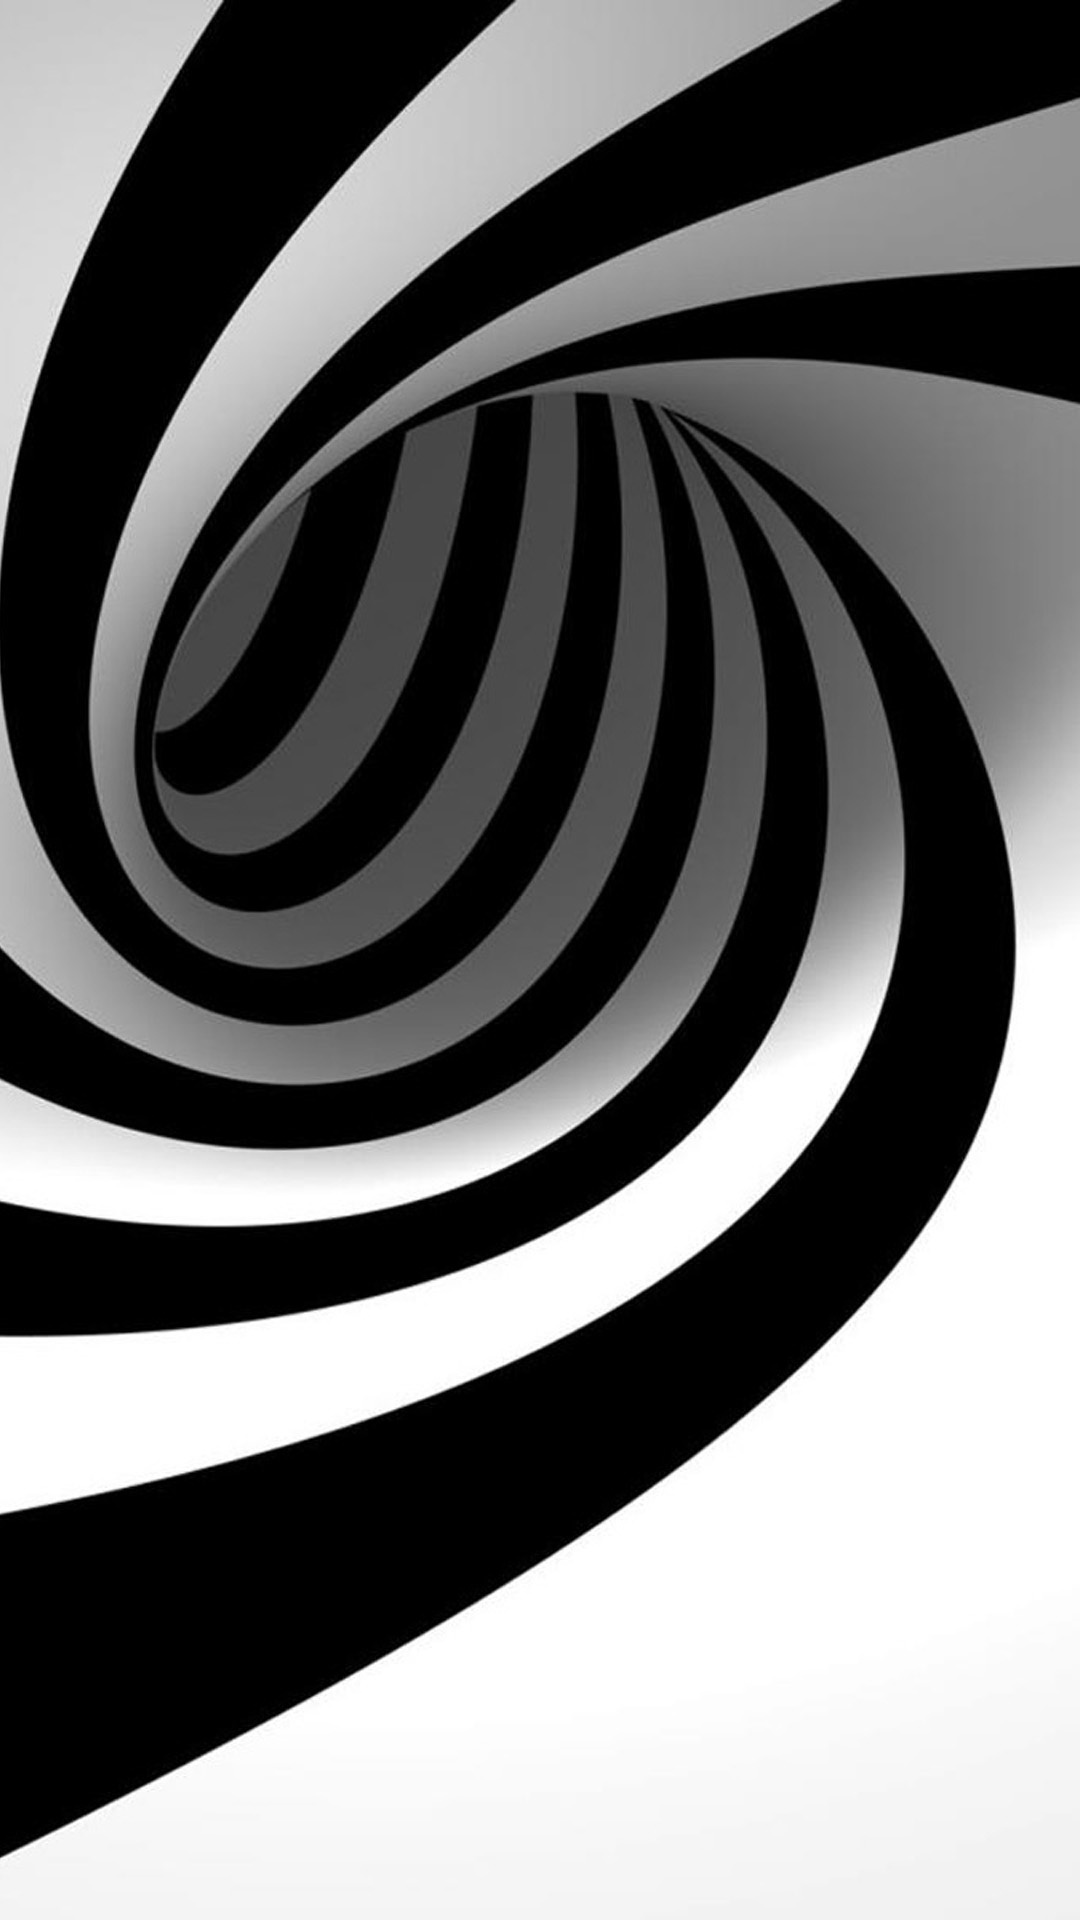 Black and white, Swirling lines, Abstract minimal, iPhone wallpaper, 1080x1920 Full HD Phone